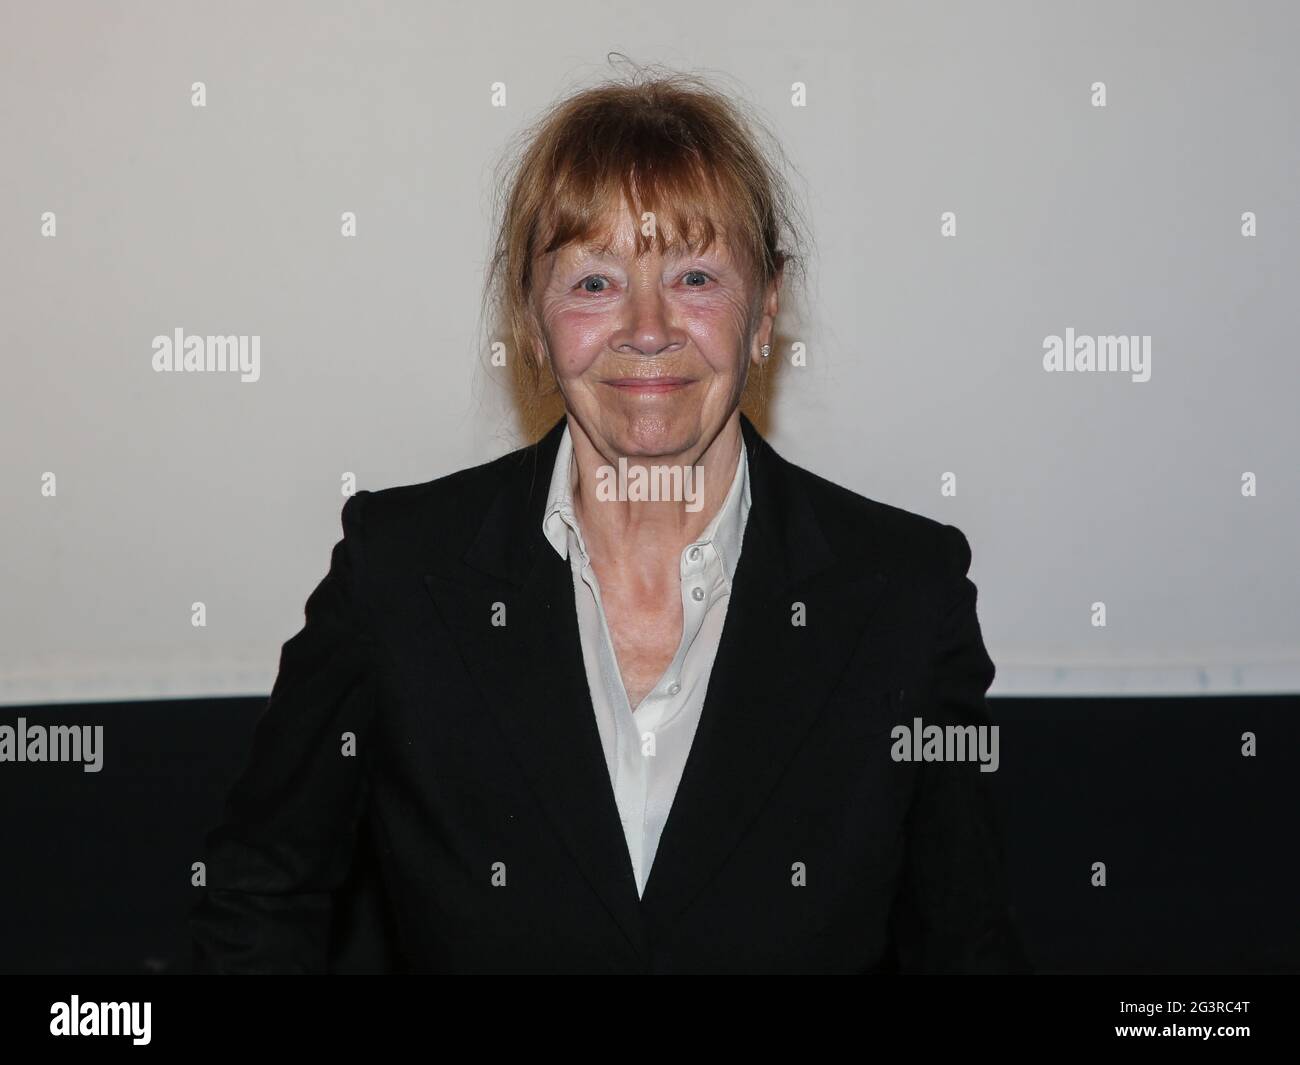 German actor Jutta Hoffmann at a film event in Magdeburg on 09.09.2020 Stock Photo